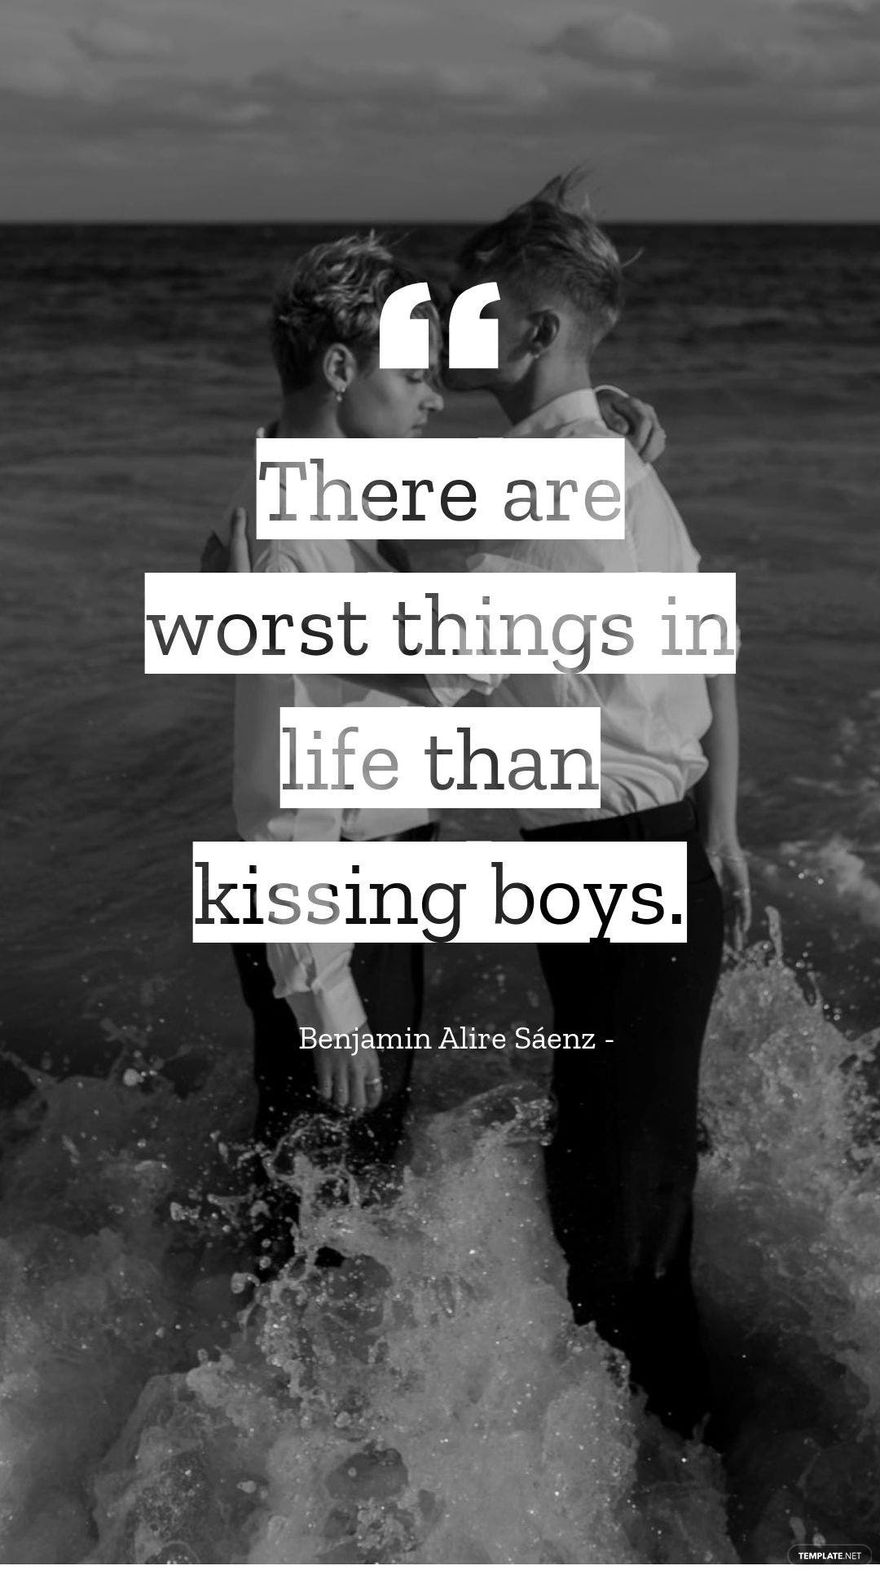 Free Benjamin Alire Sáenz - There are worst things in life than kissing boys. in JPG